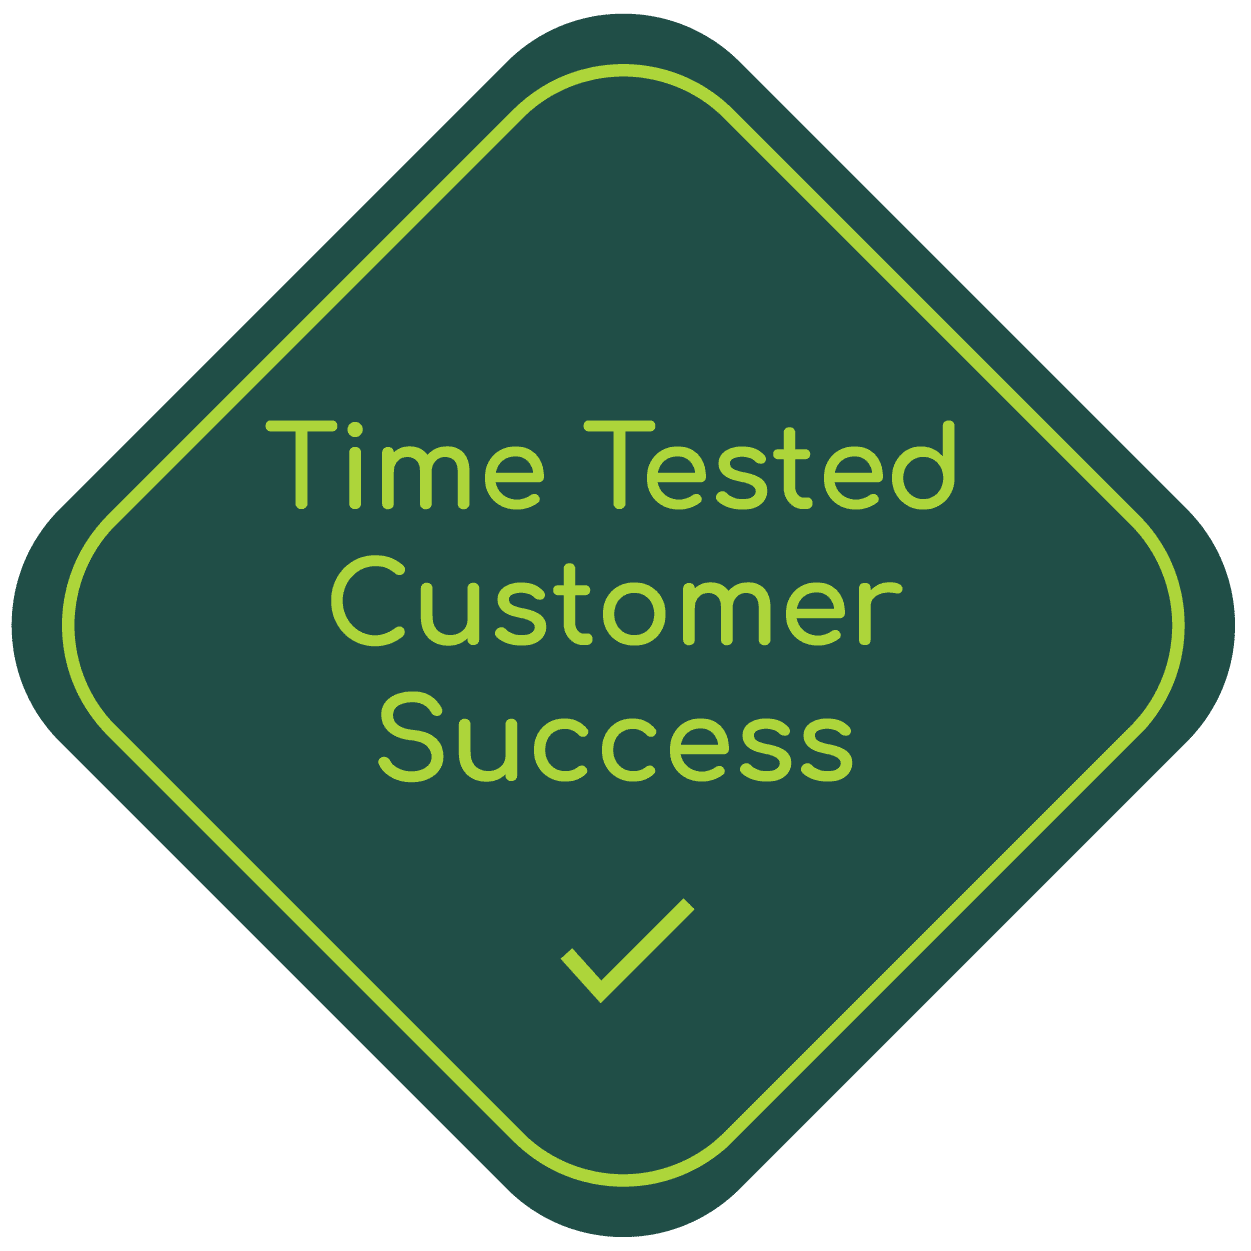 Time Tested Customer Success 